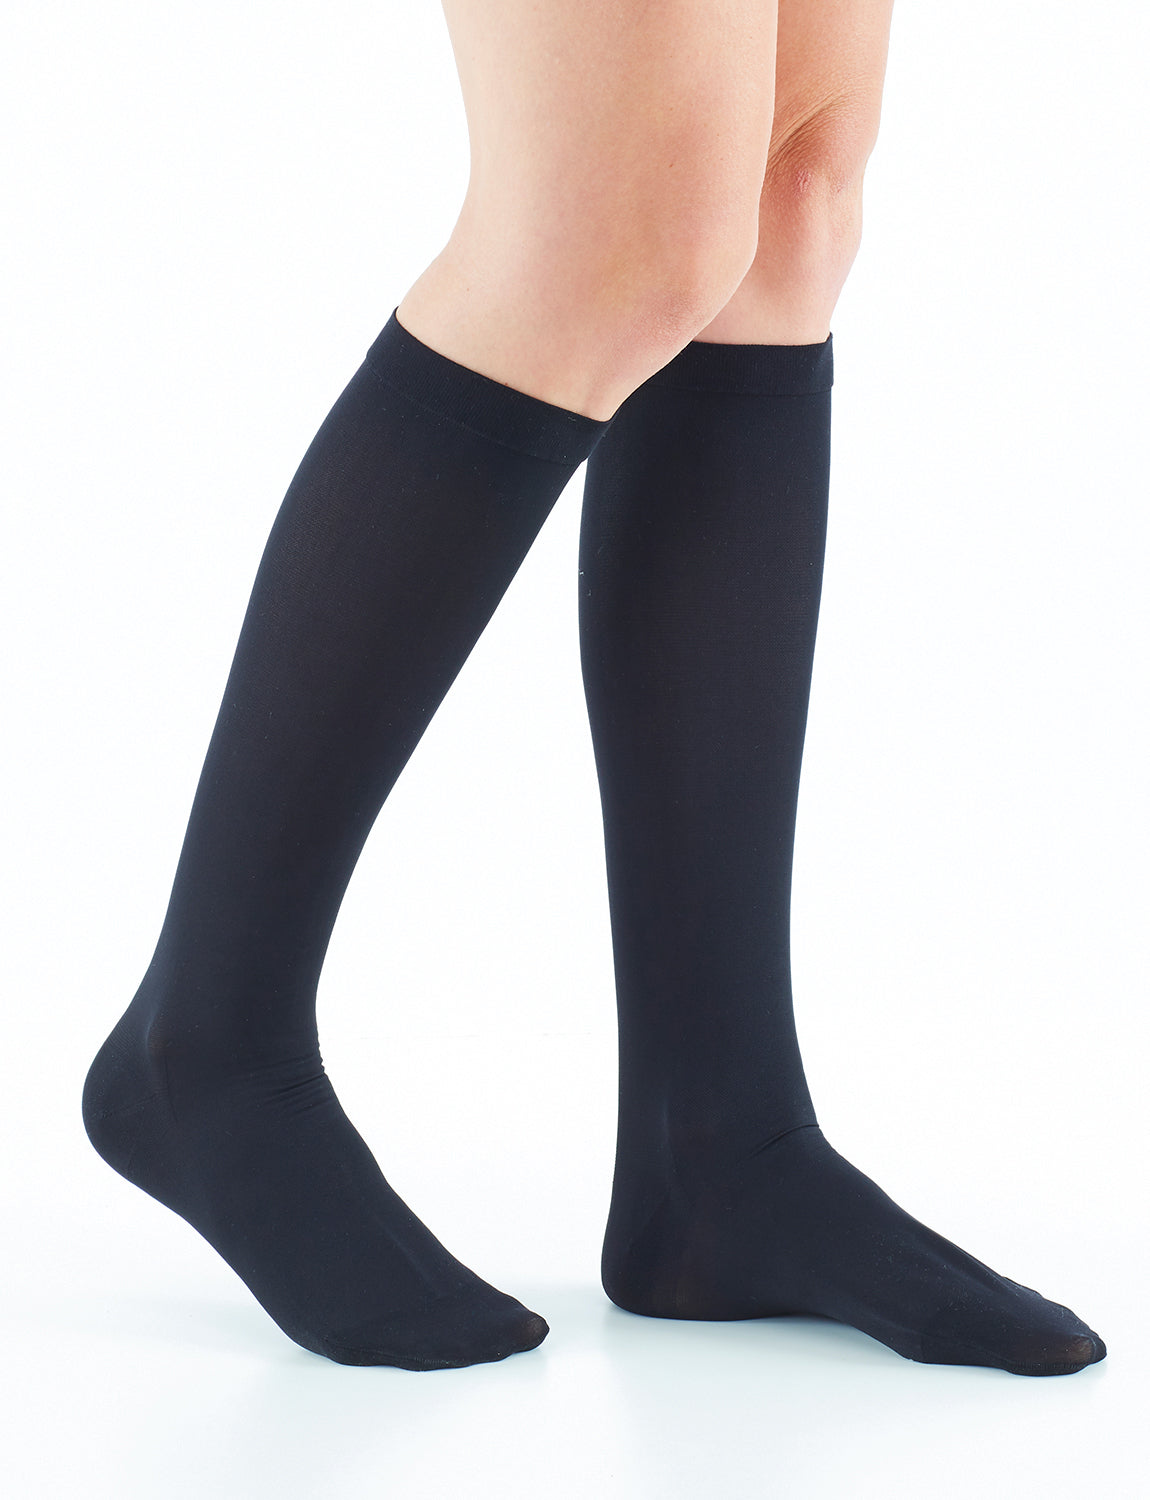 8 Highly Recommended Compression Socks for Long Flights, According to  Frequent Travelers